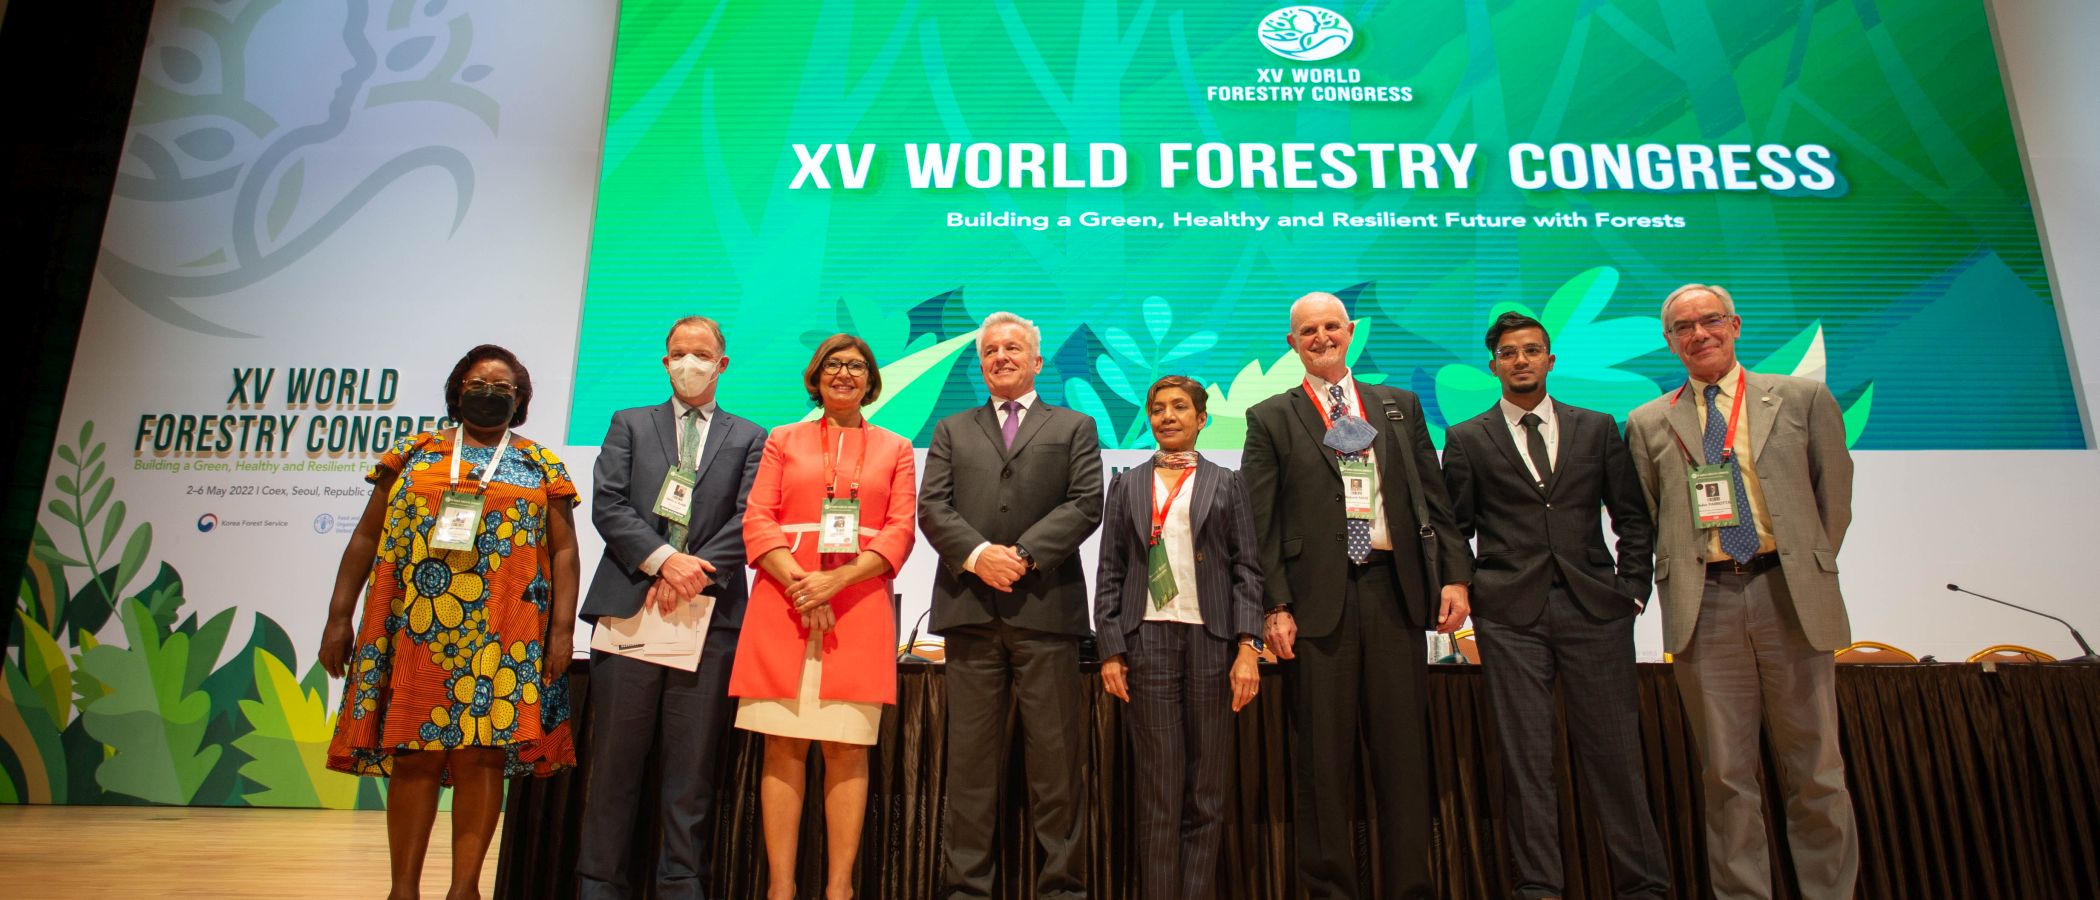 Collaborative Partnership on Forests Dialogue, a special event at the XV World Forestry Congress